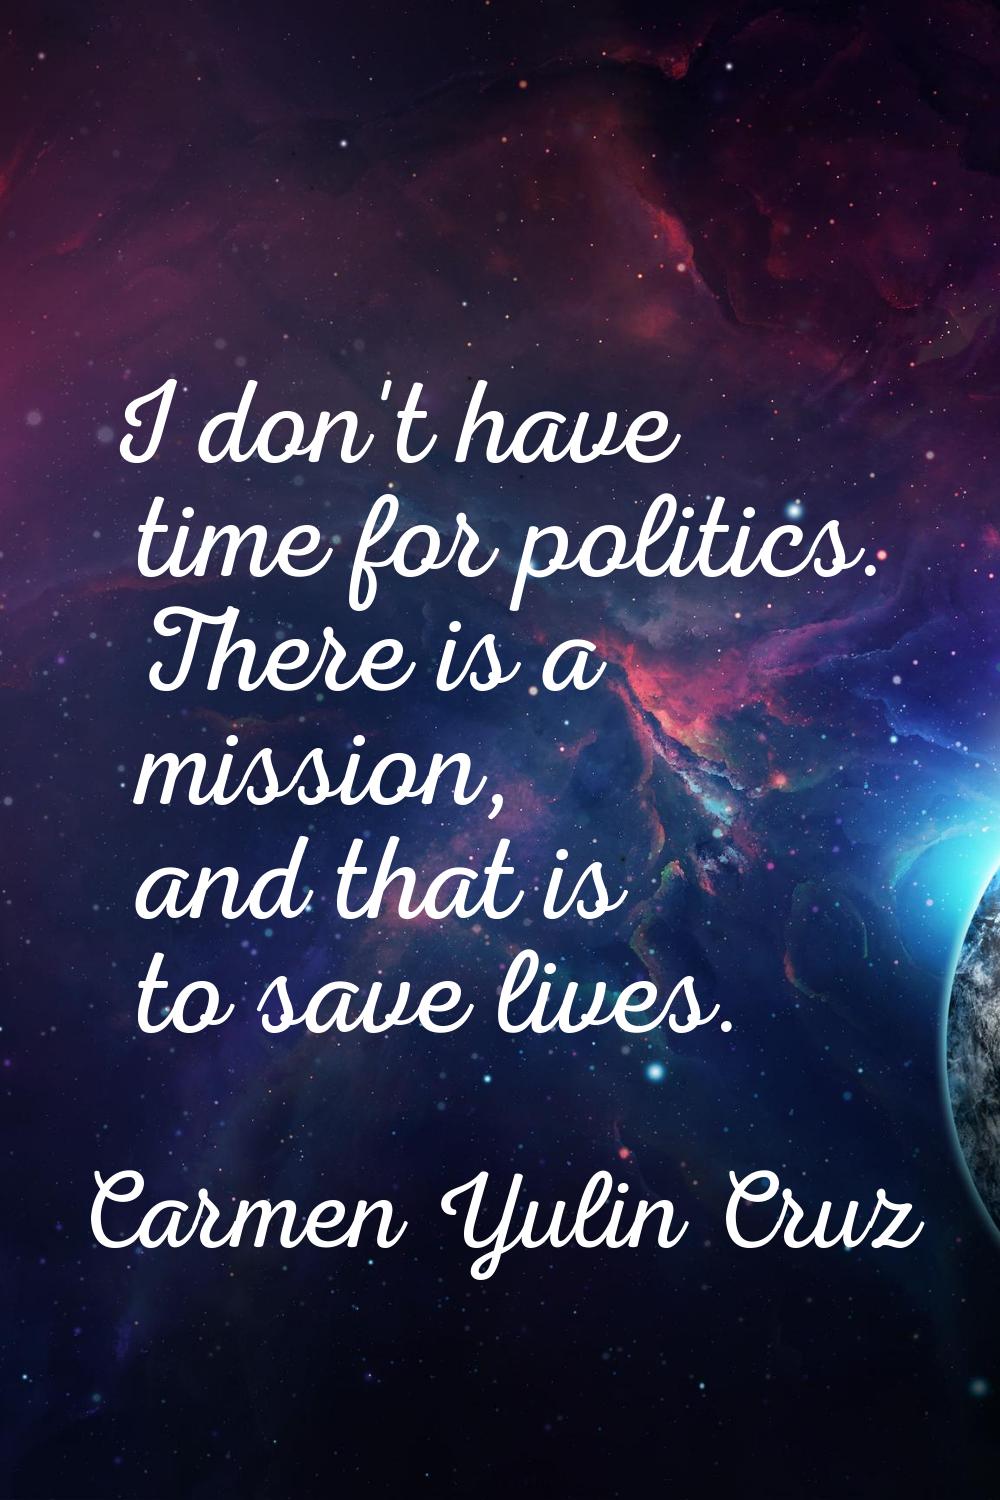 I don't have time for politics. There is a mission, and that is to save lives.